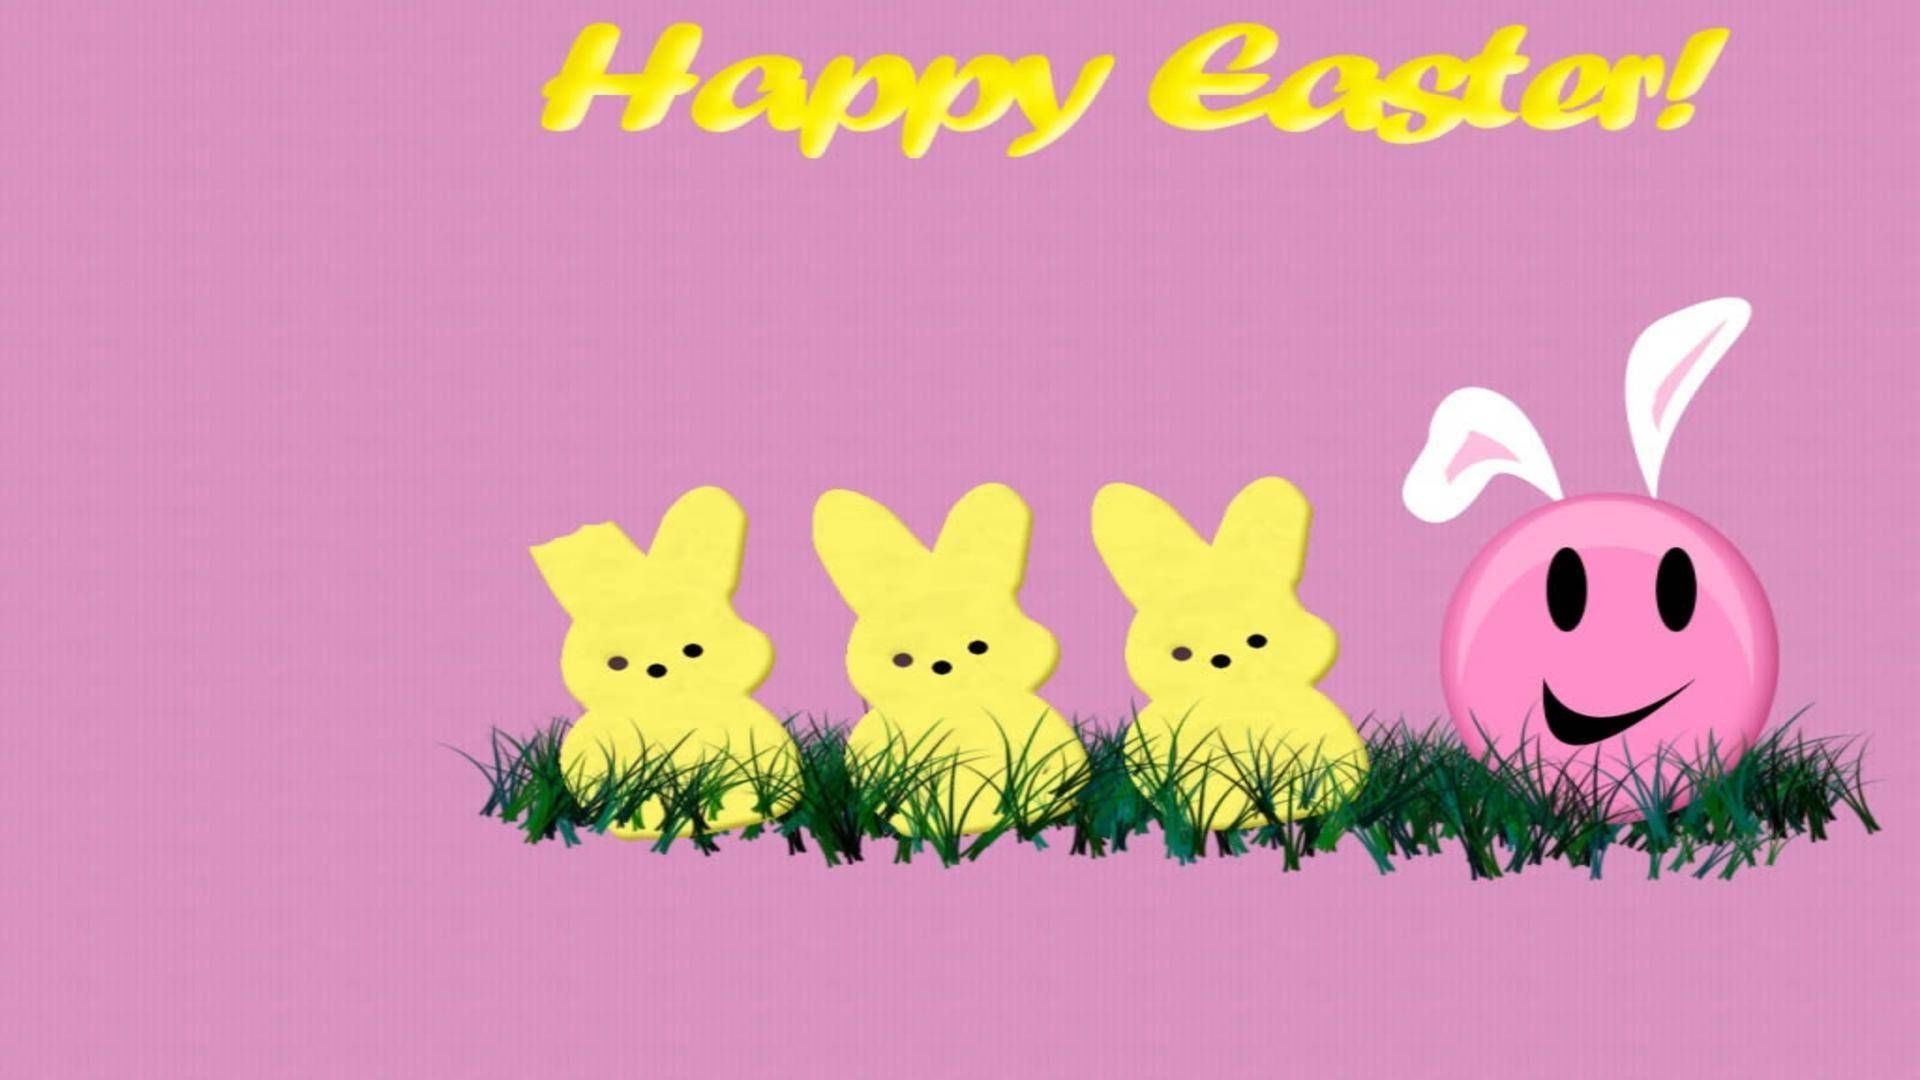 Happy Easter wallpaper with three bunnies and a pink egg - Easter